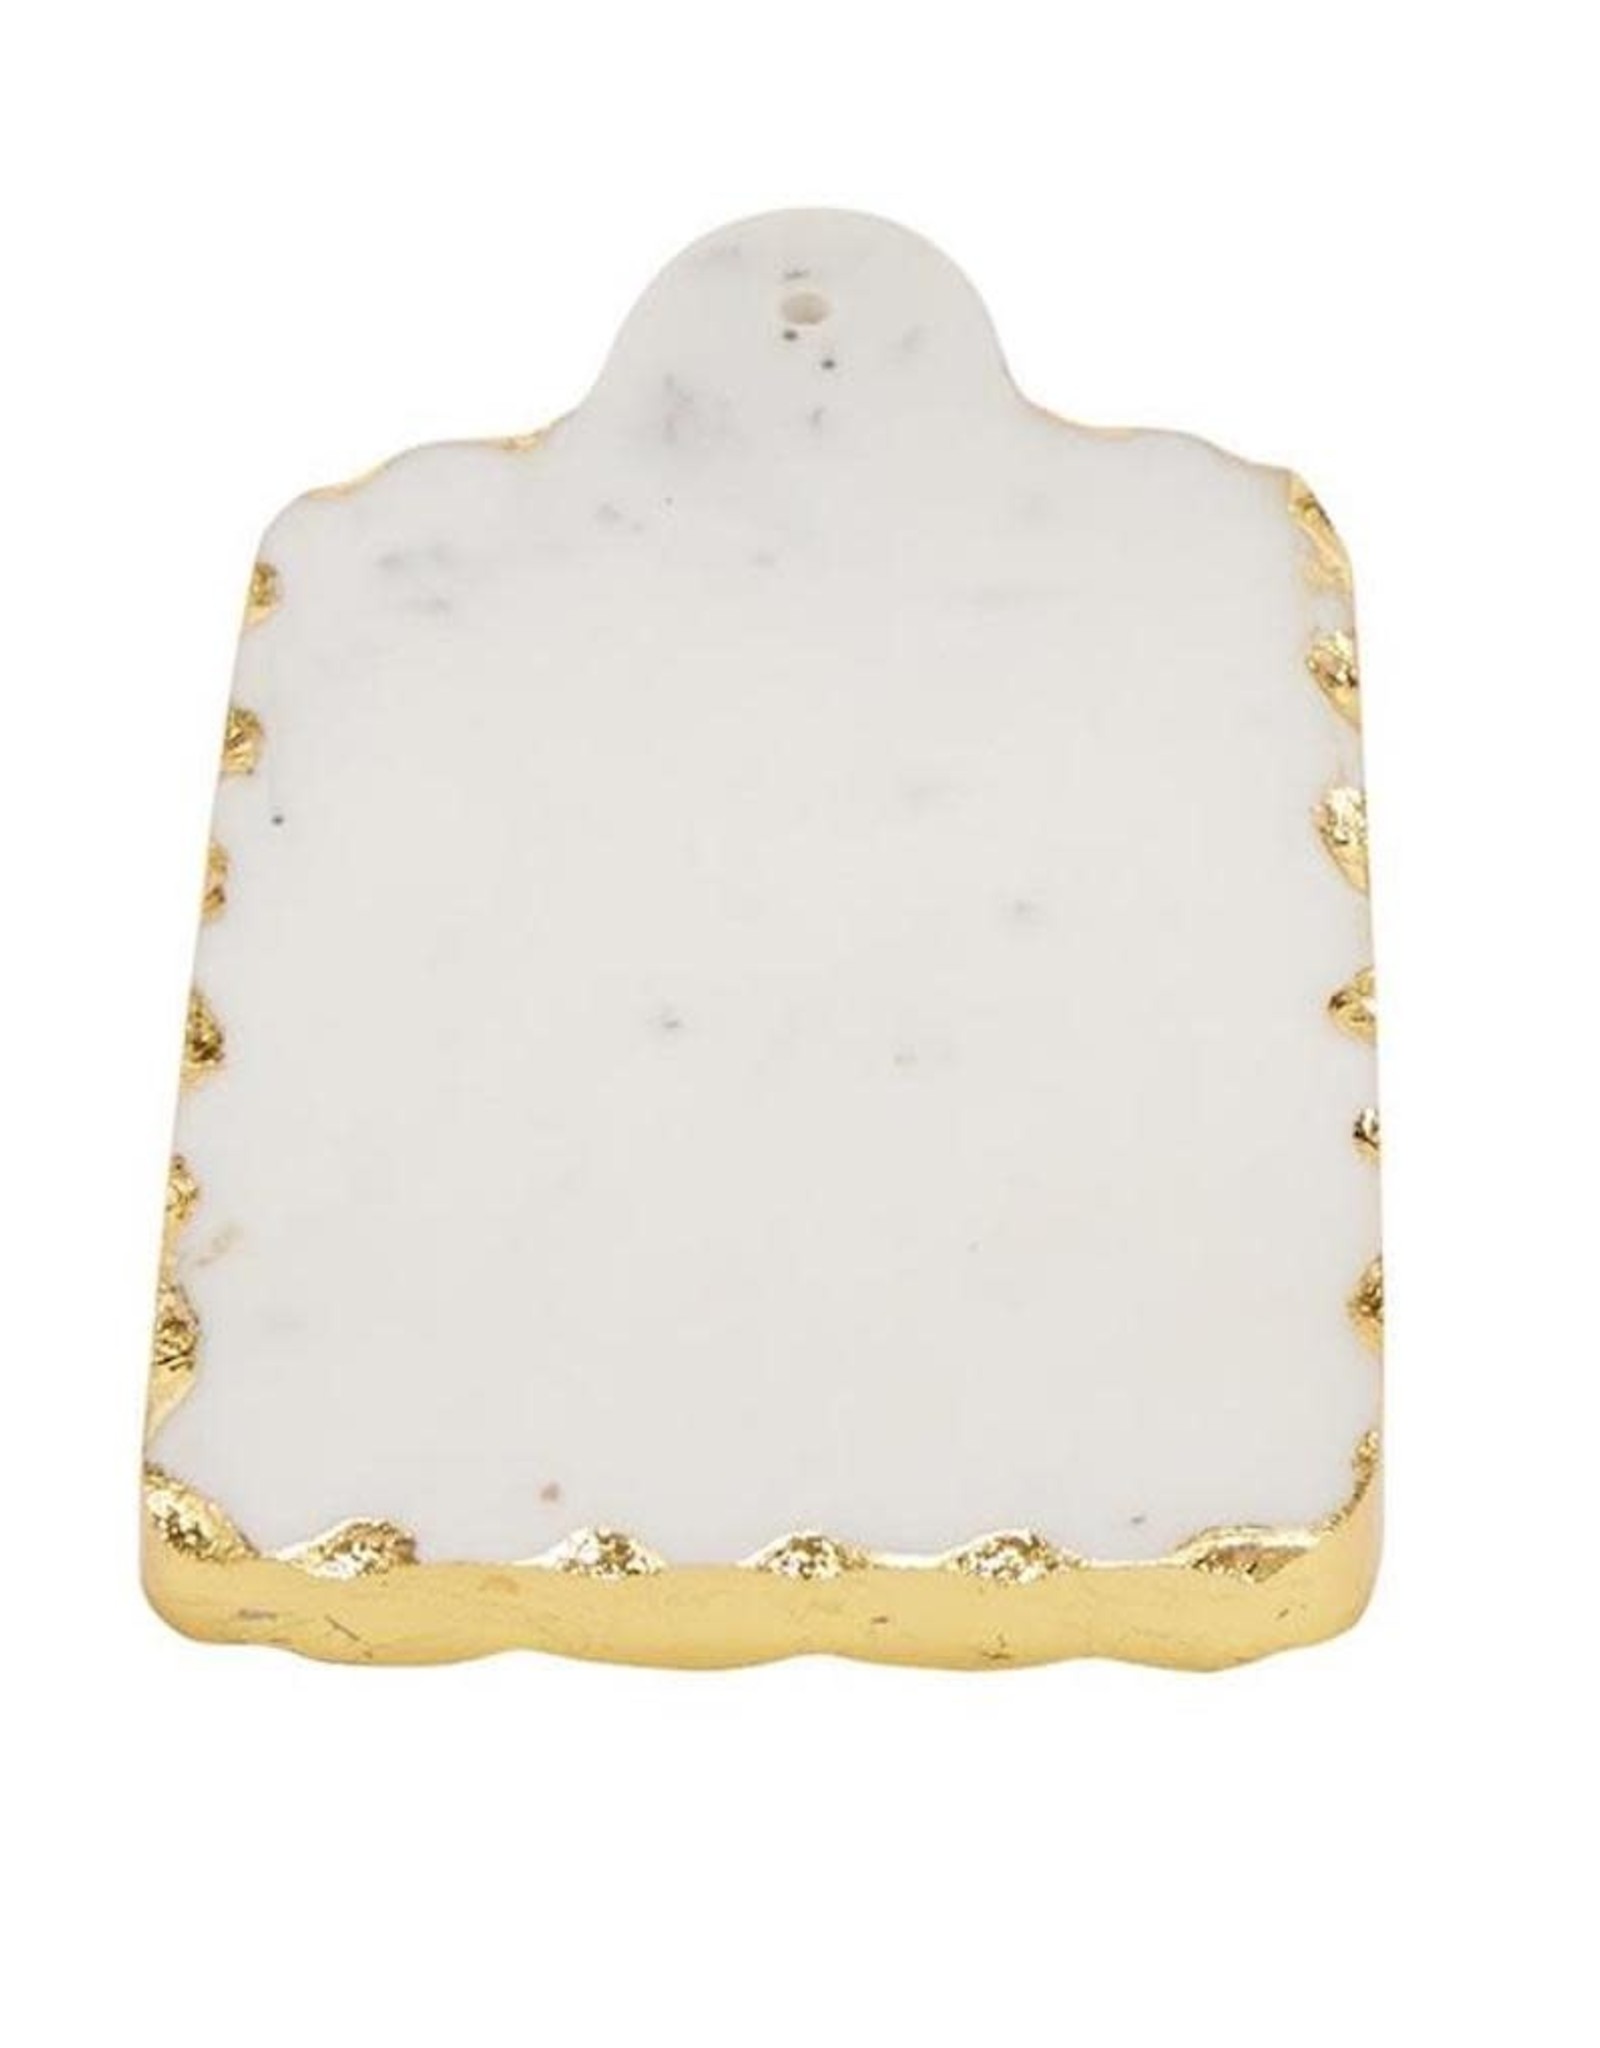 Mud Pie Chipped Marble Gold Edge Rectangular Paddle Board